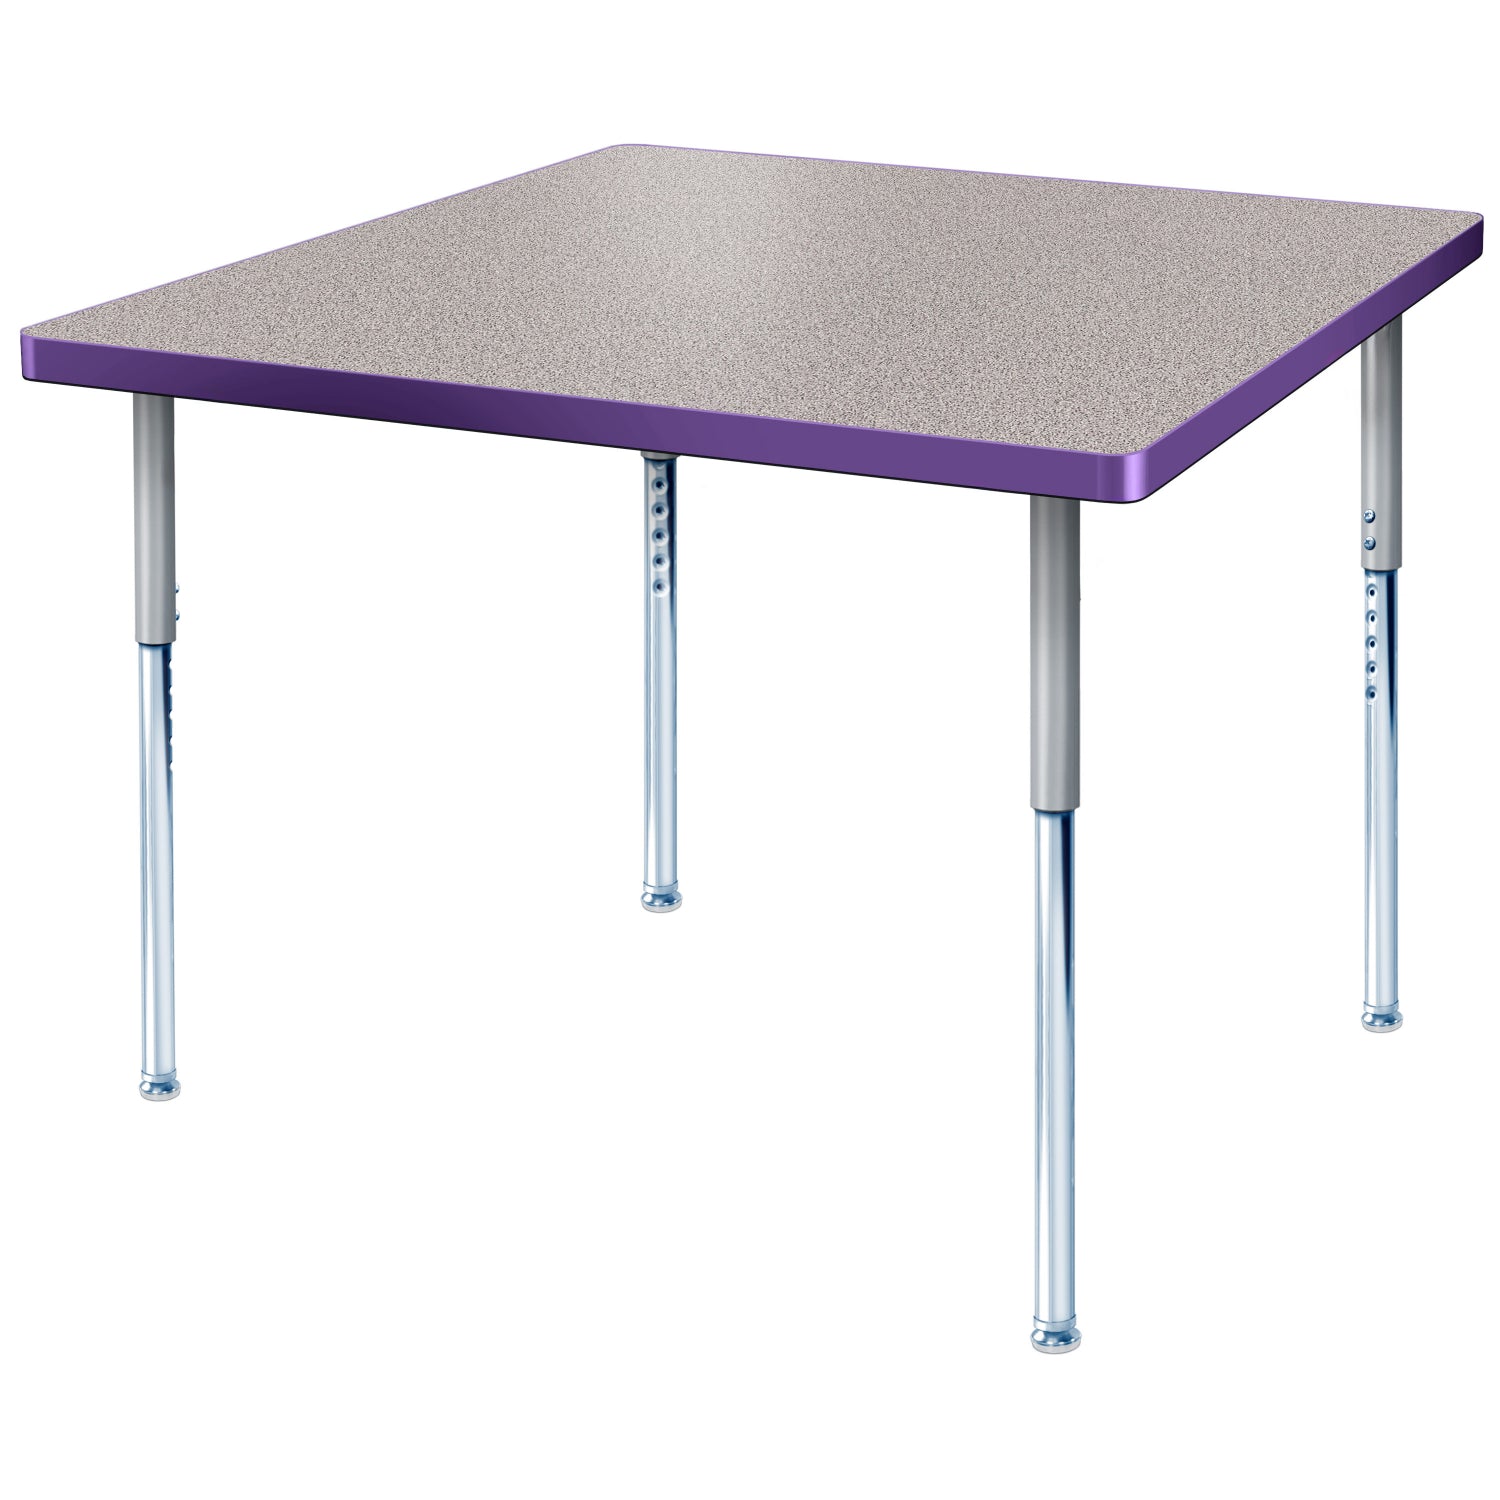 Modern Classic Series 42 x 42" Square Activity Table with High Pressure Laminate Top, Adjustable Height Legs